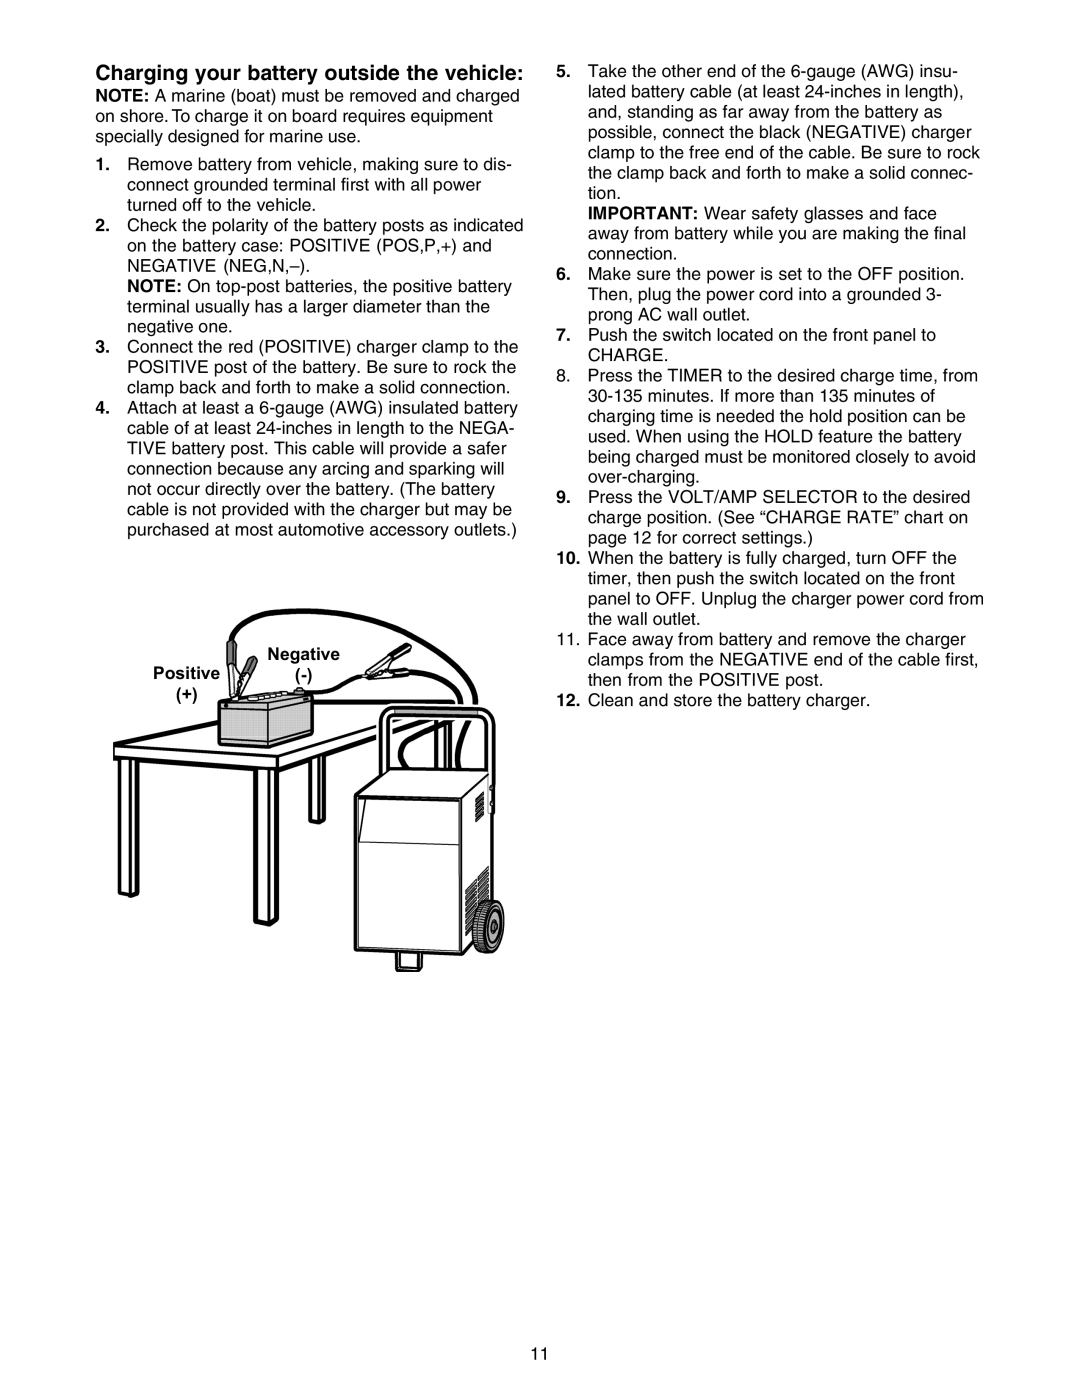 Sears 200.71233 owner manual Charging your battery outside the vehicle, Negative Positive + 